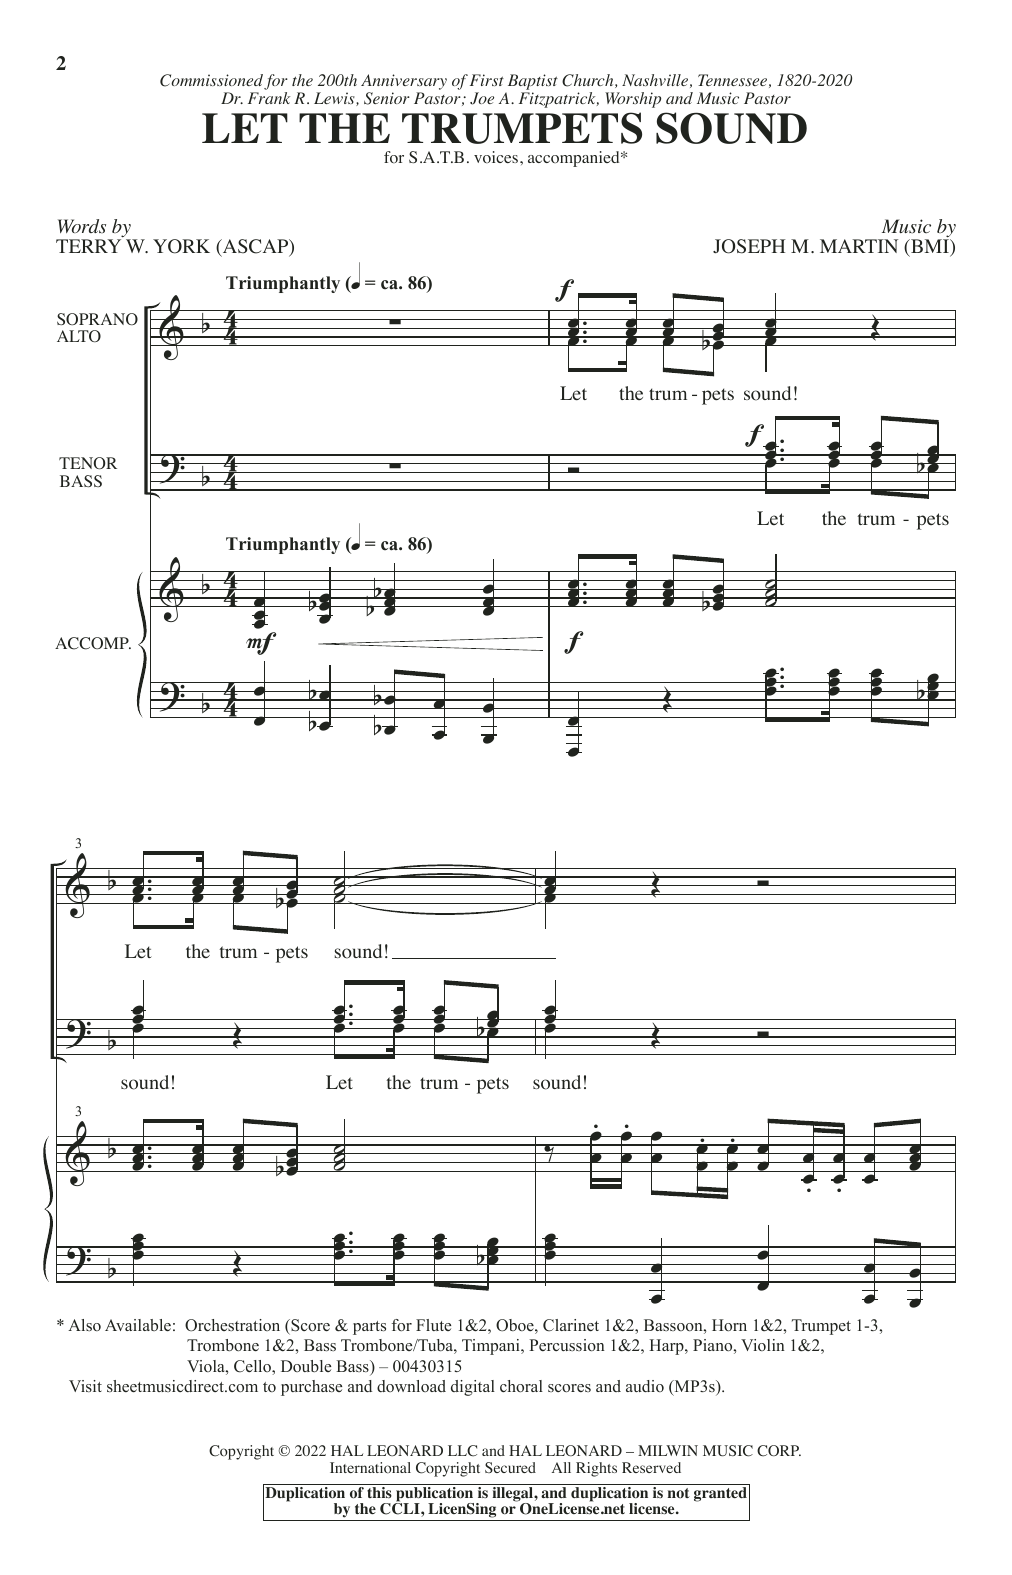 Download Terry W. York and Joseph M. Martin Let The Trumpets Sound Sheet Music